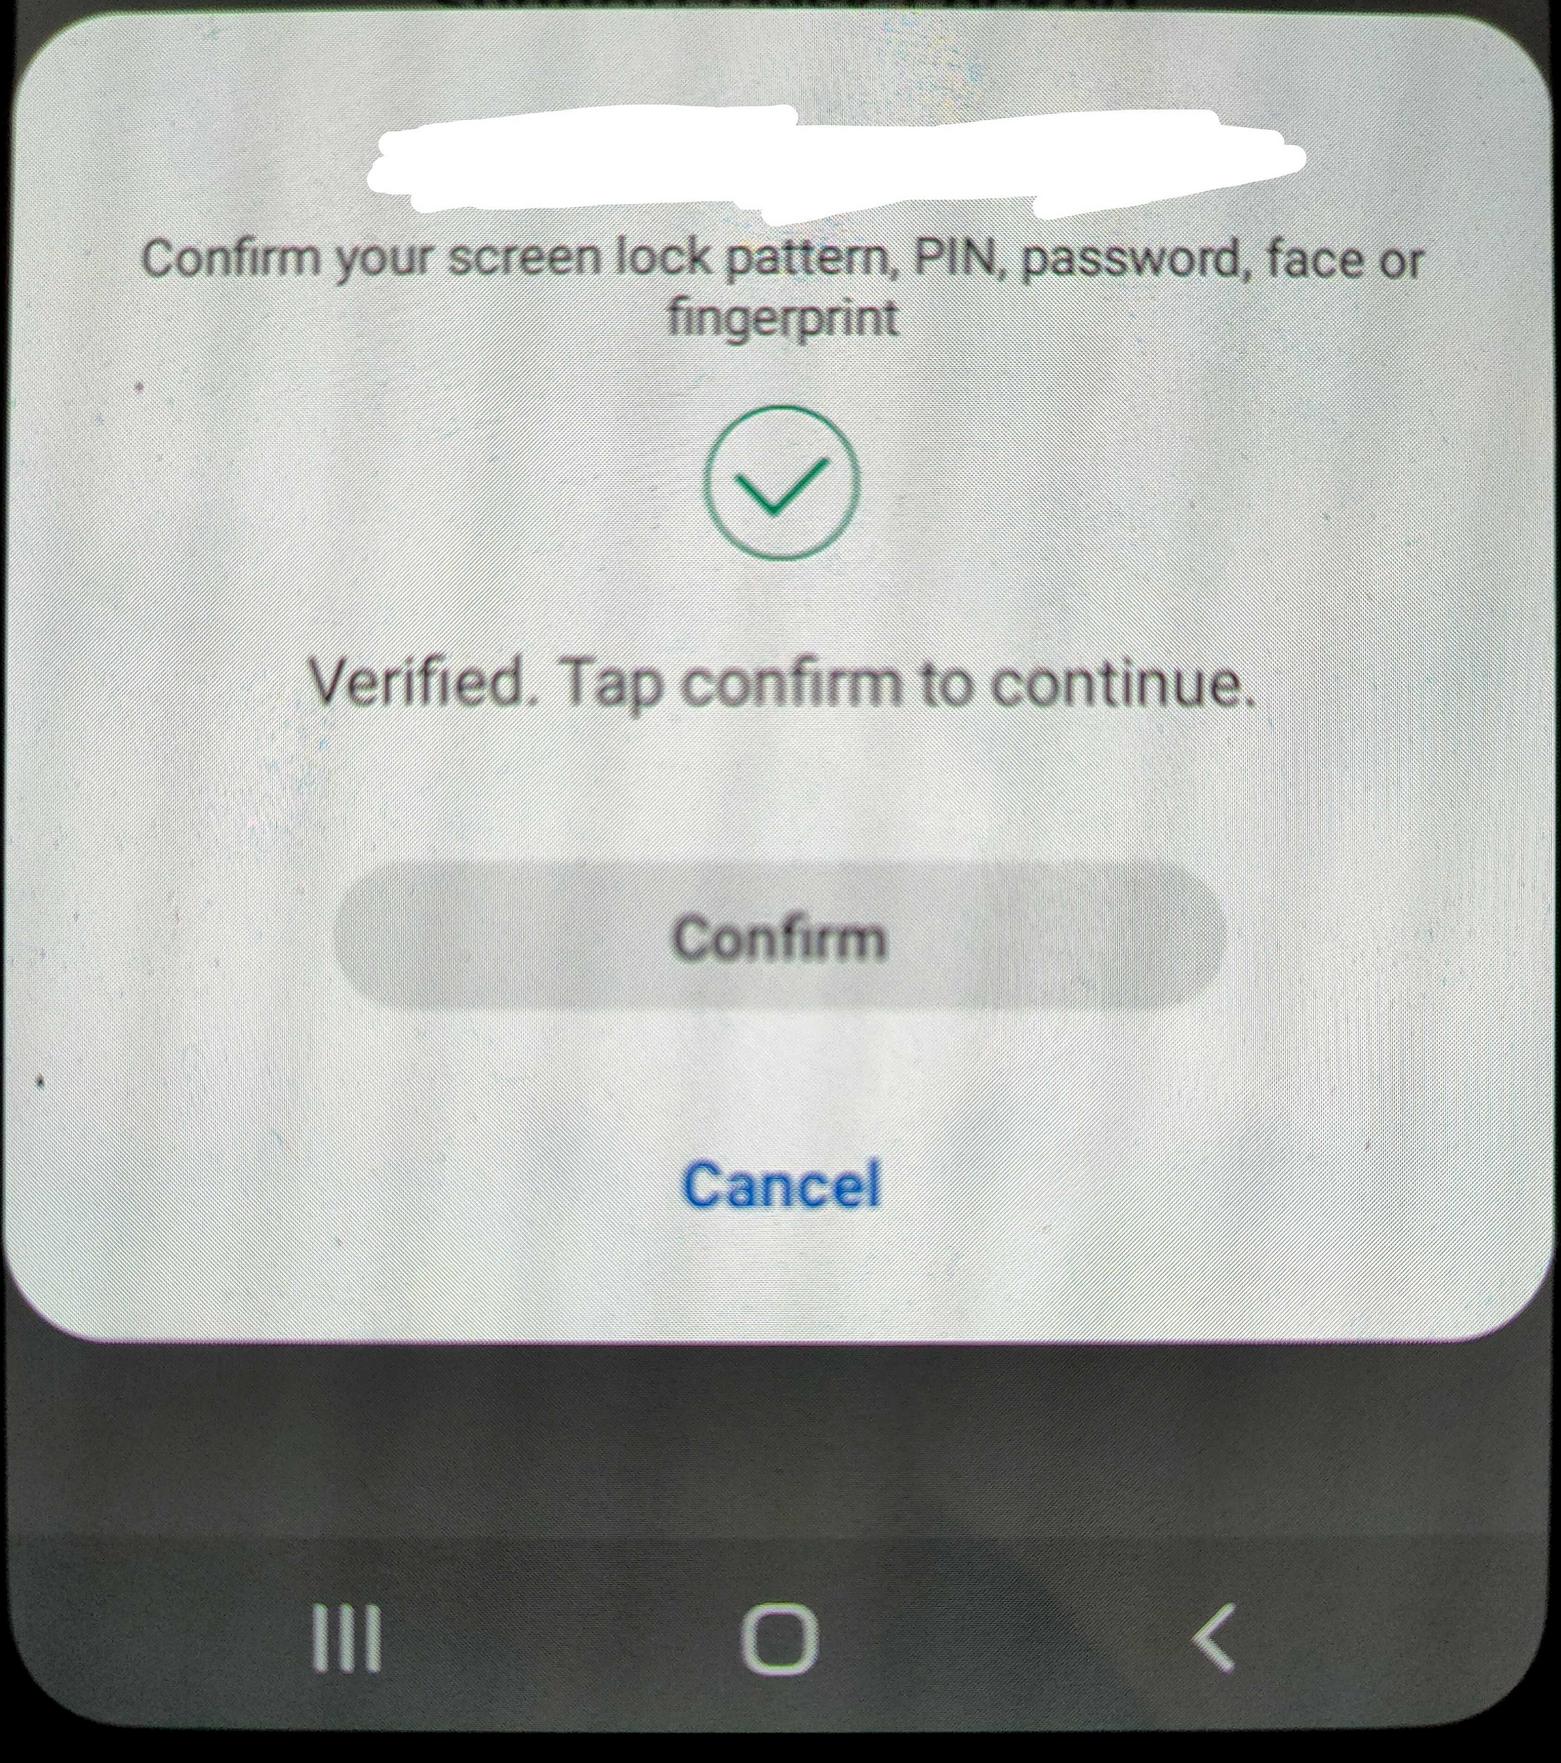 Read the information on the screen and tap "Reset" to confirm.
Enter your password or PIN if prompted.